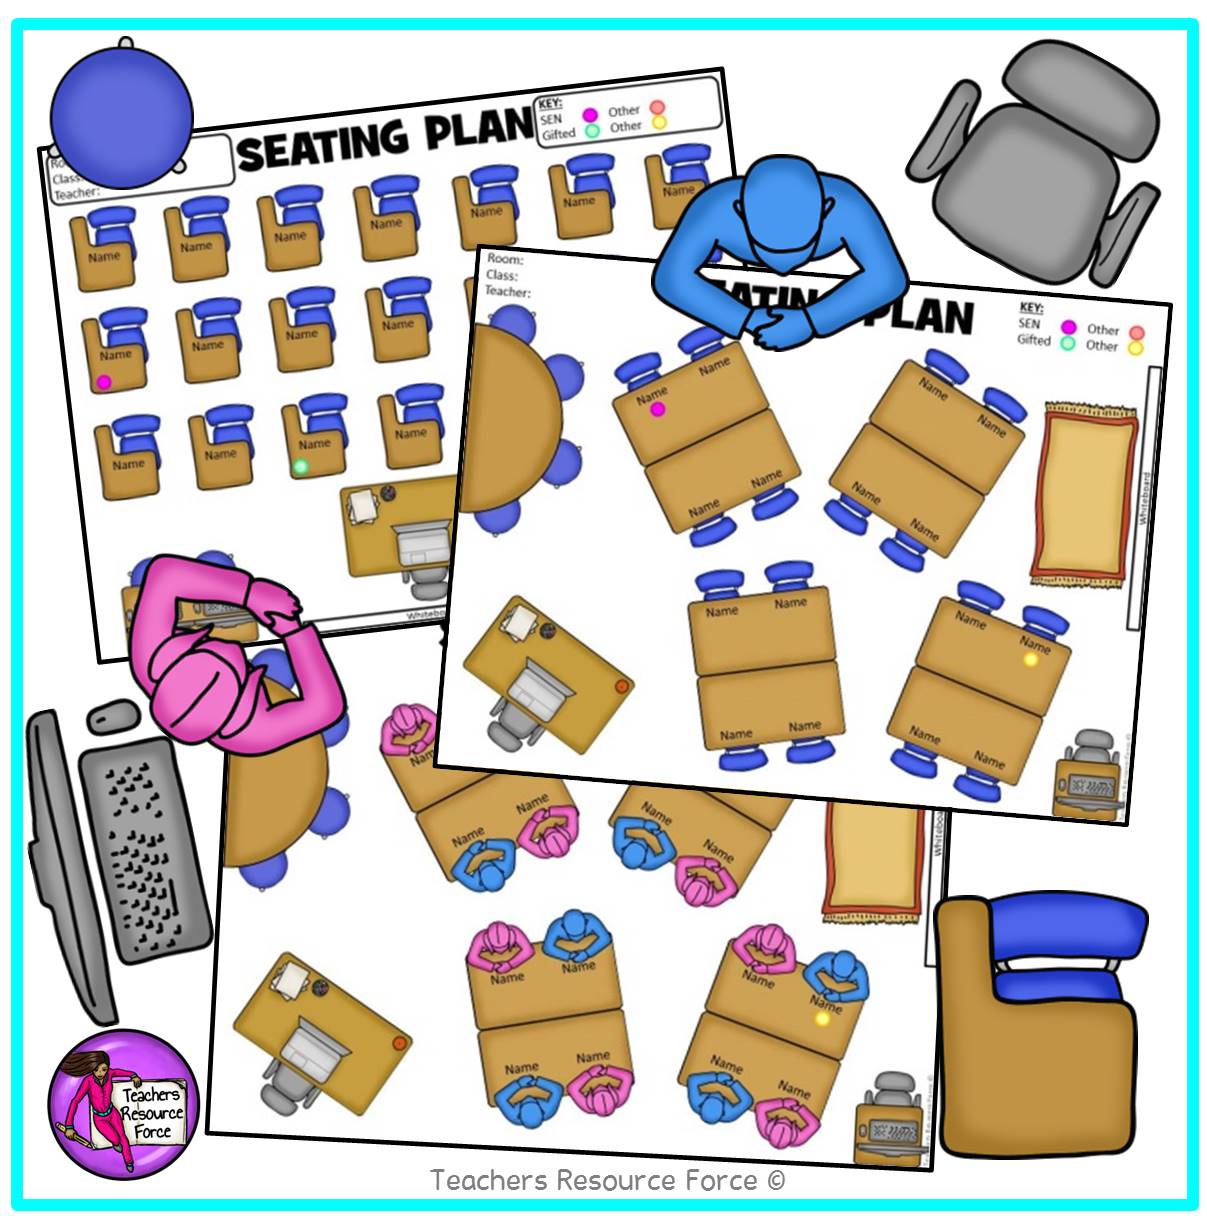 Editable Classroom Seating Chart Template Plan (with movable images